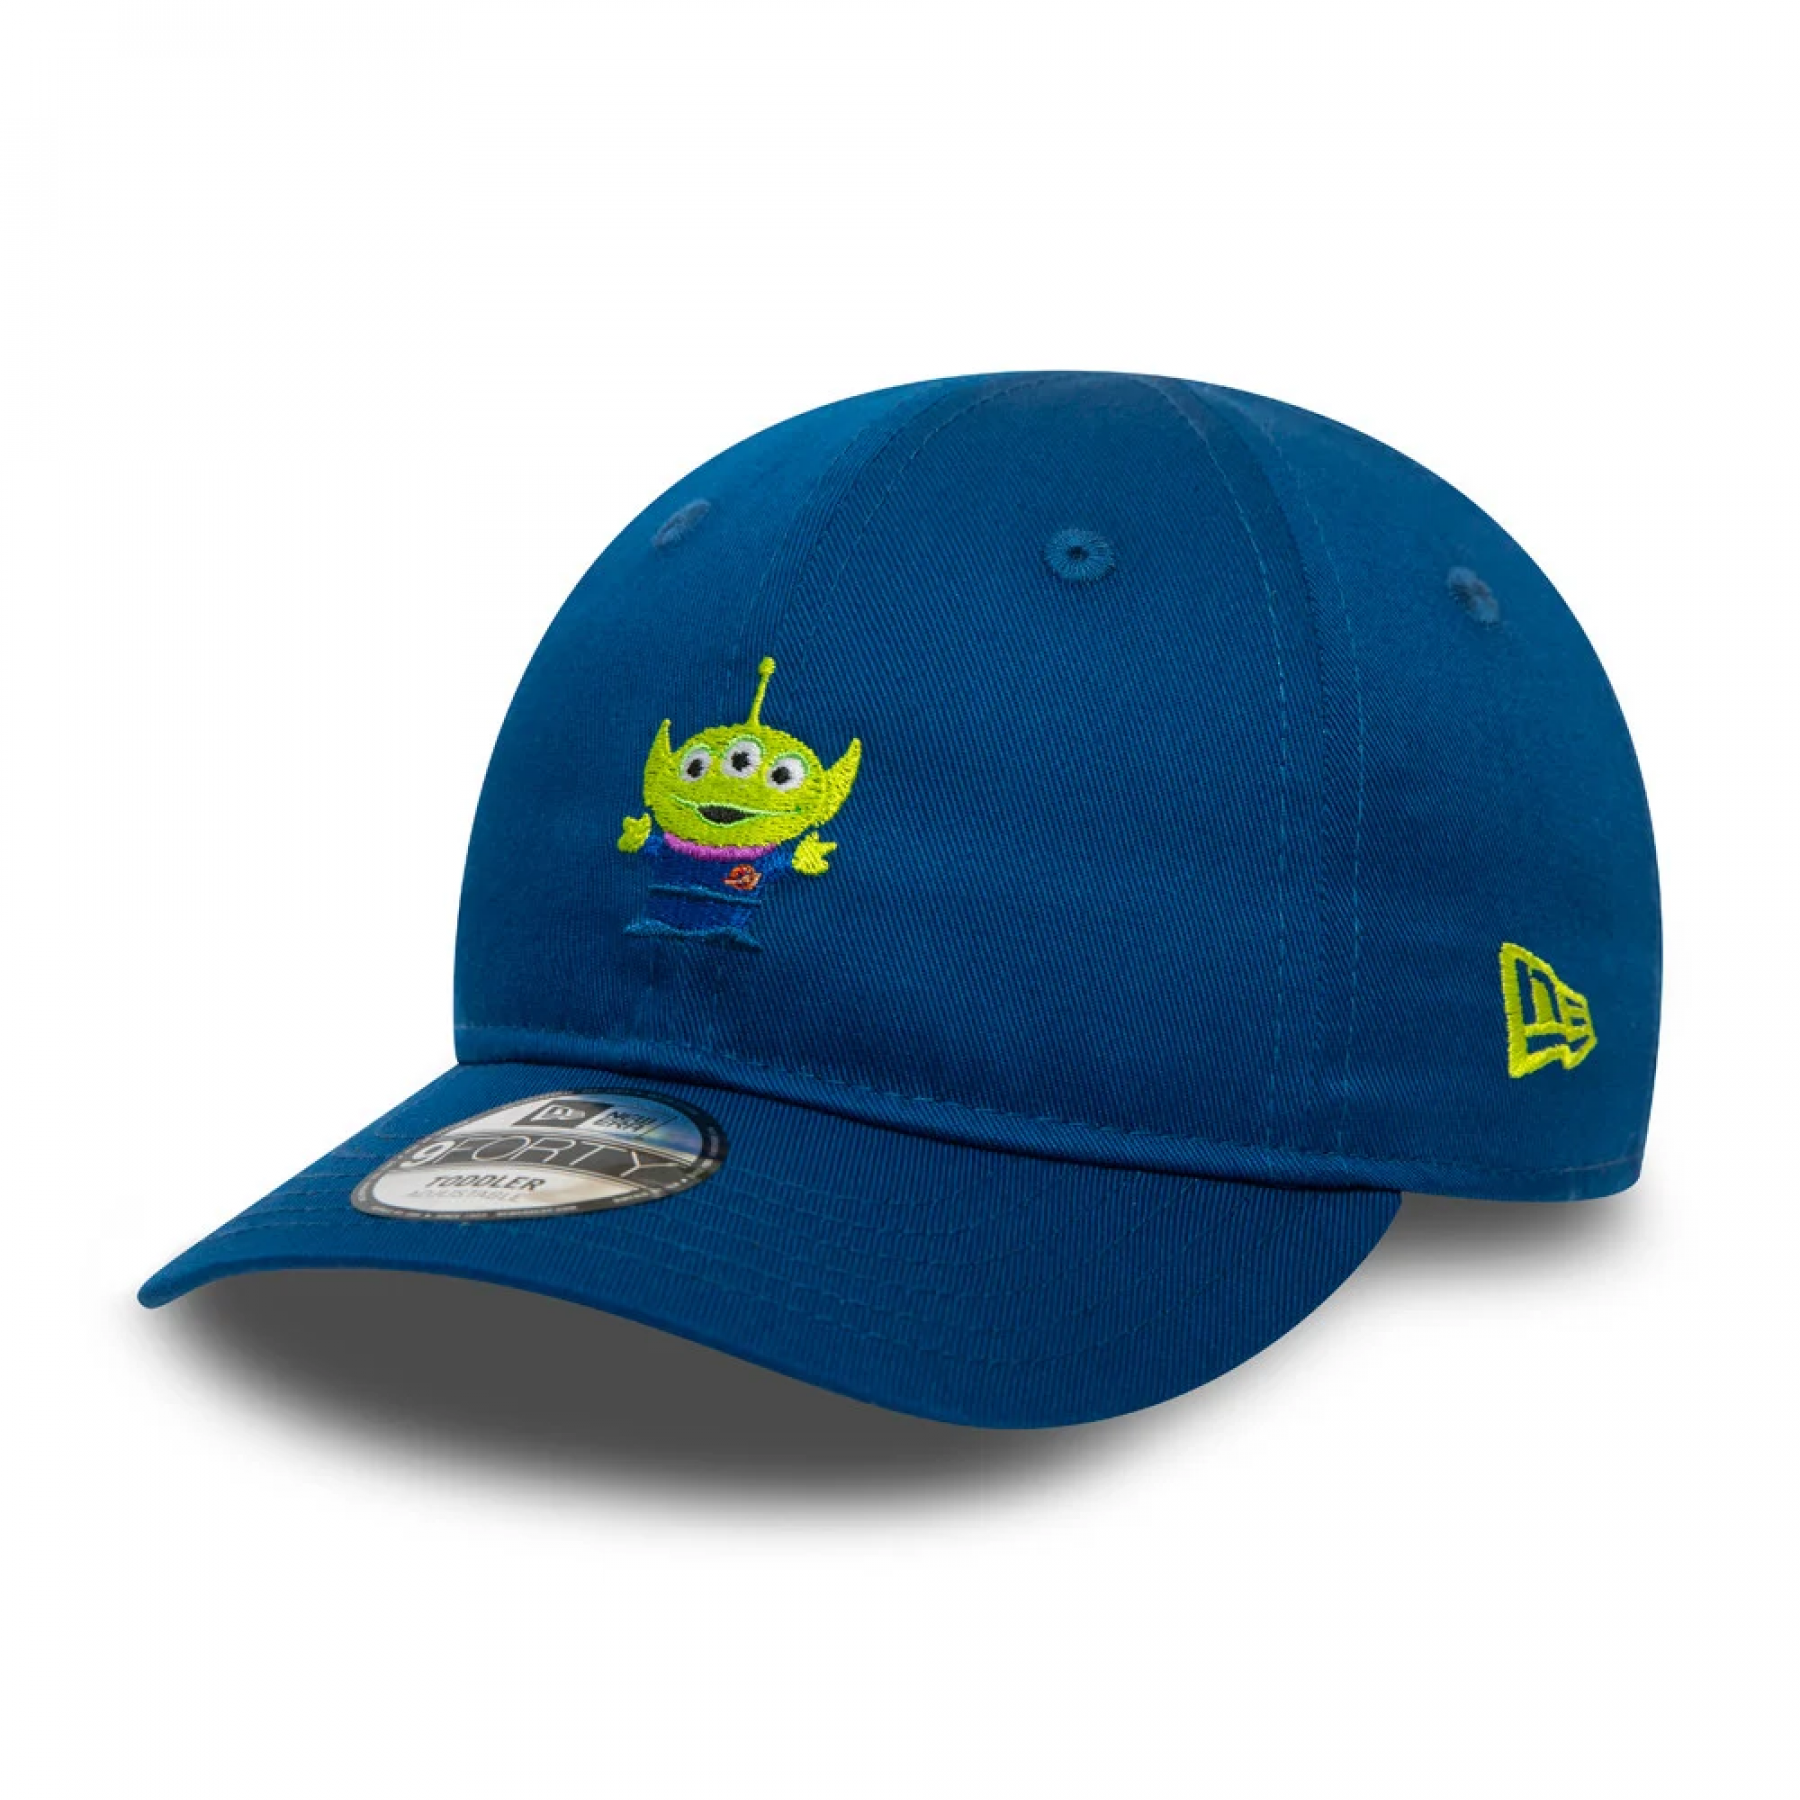 Baby cap New era 9forty Toy story Alien